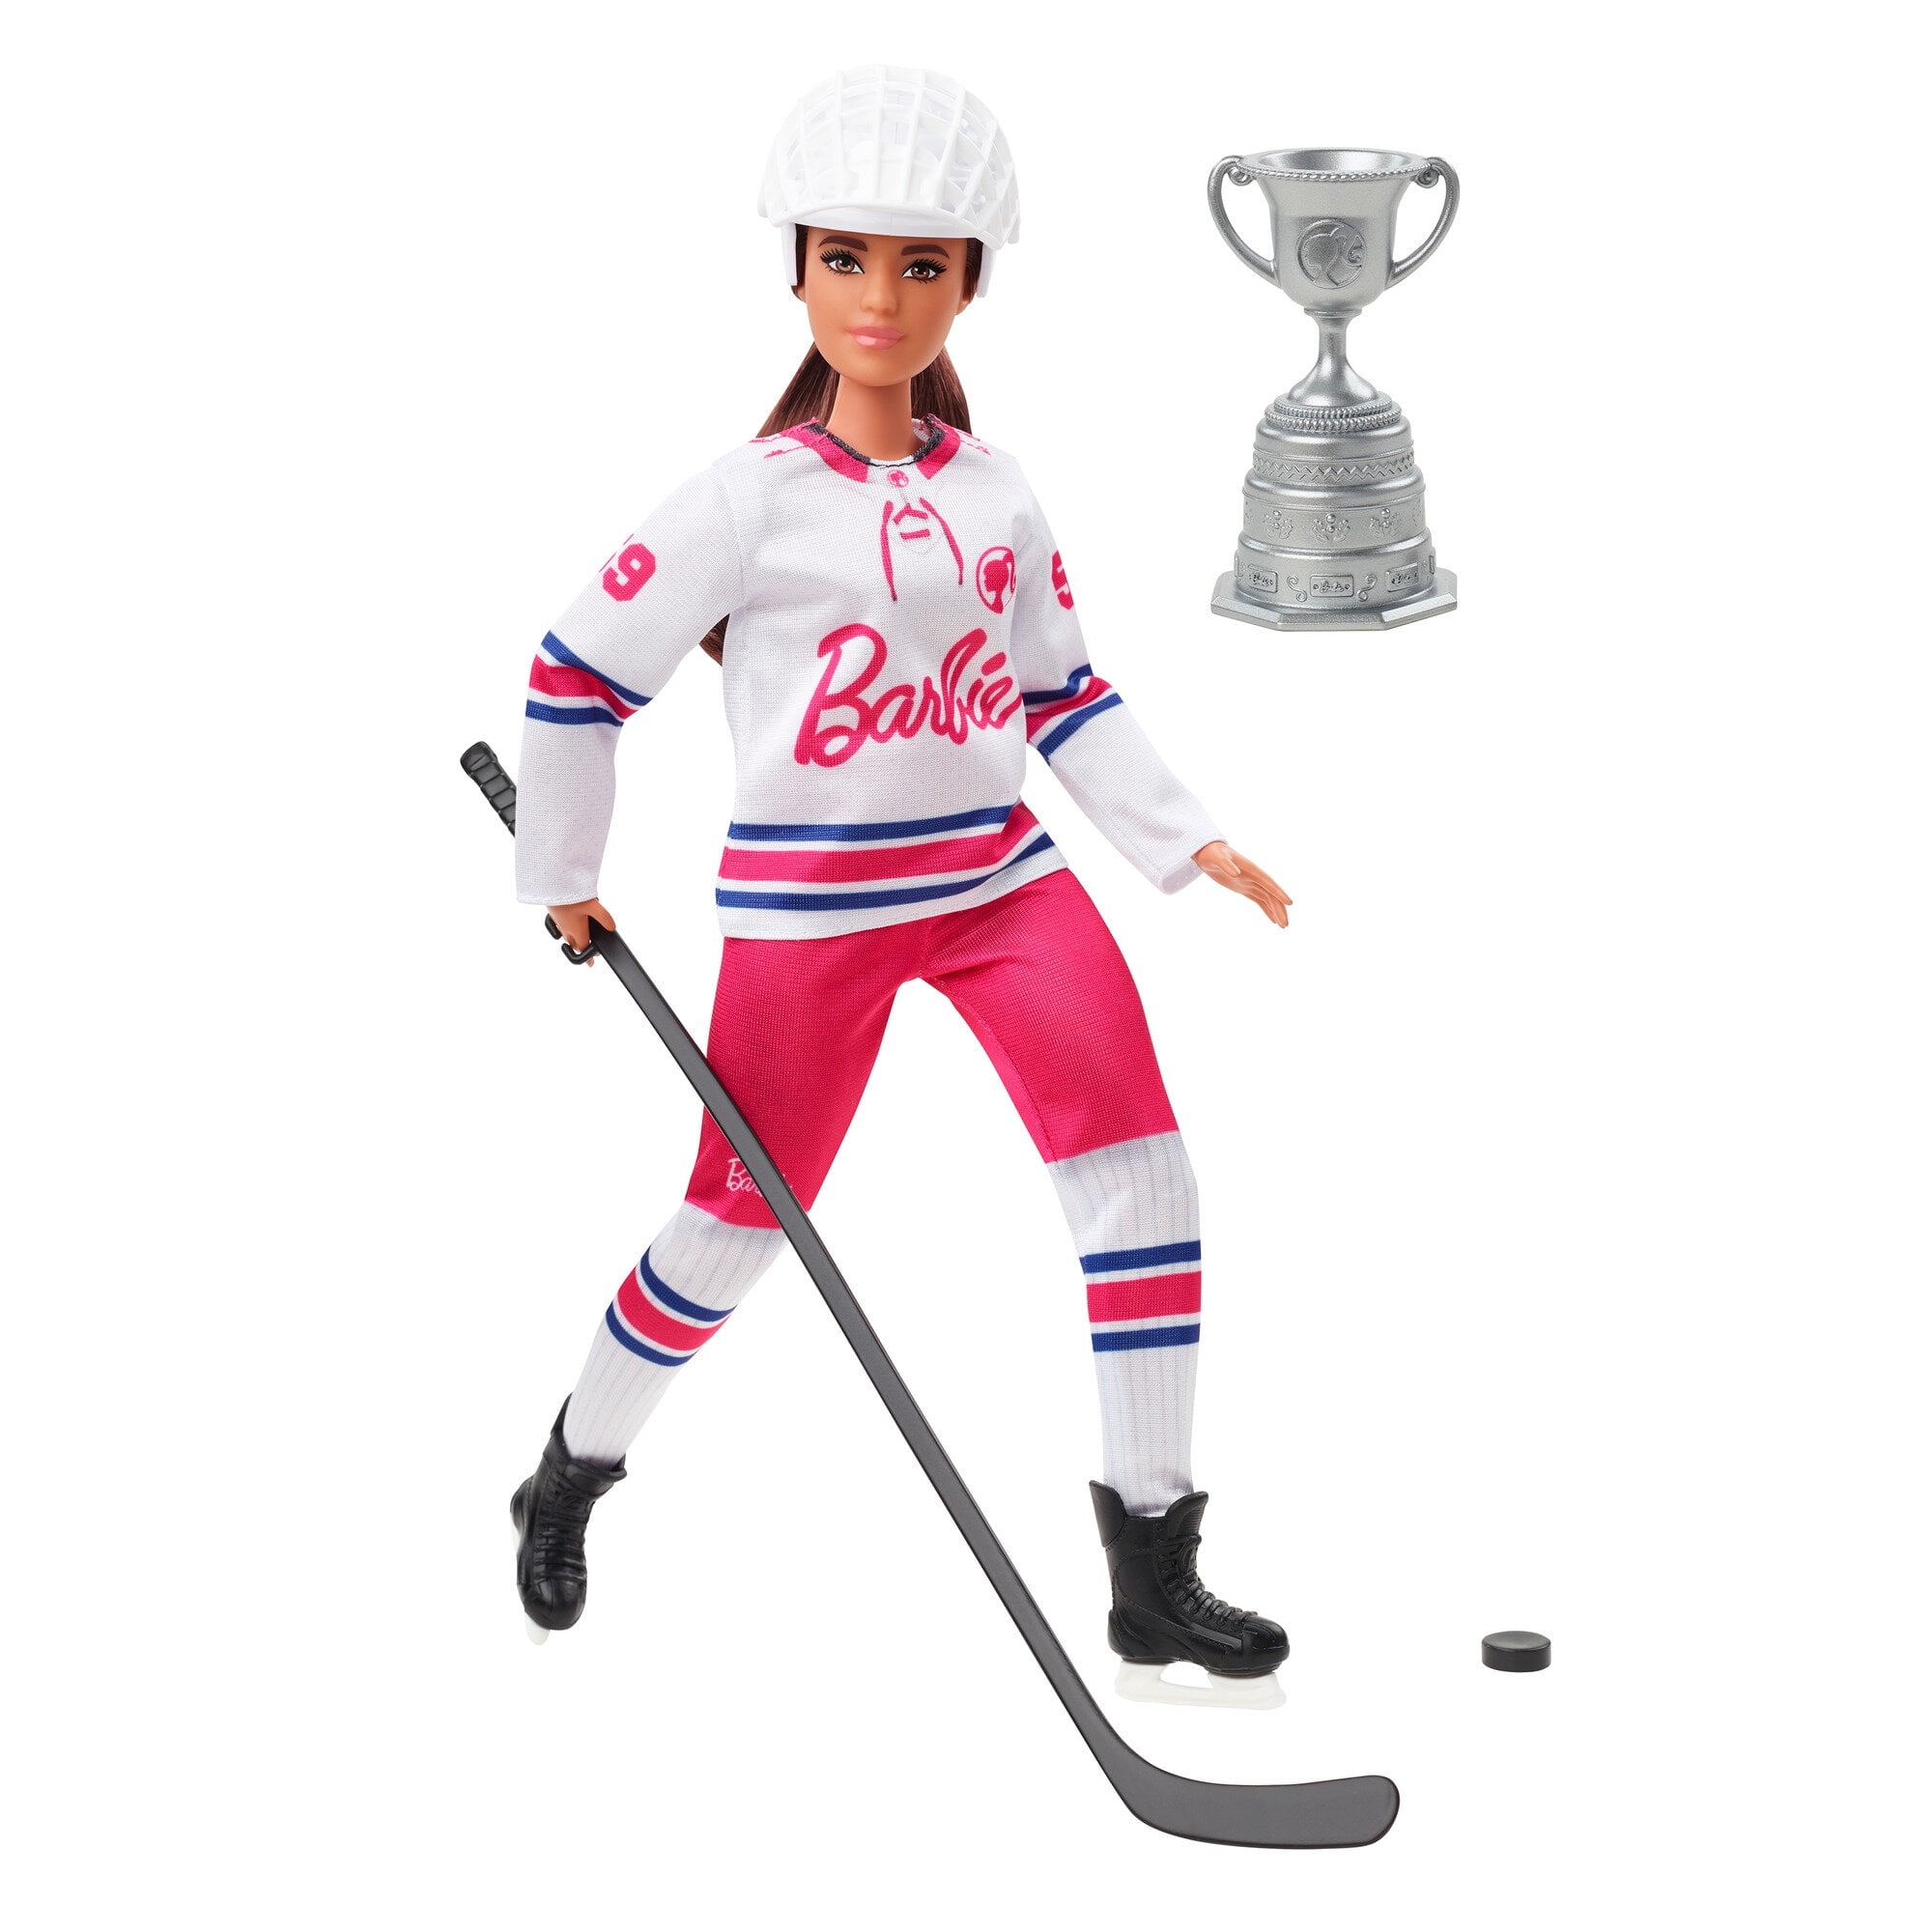 Barbie Hockey Player Fashion Doll Dressed in Jersey and Helmet with Curvy Shape and Hockey Accessories